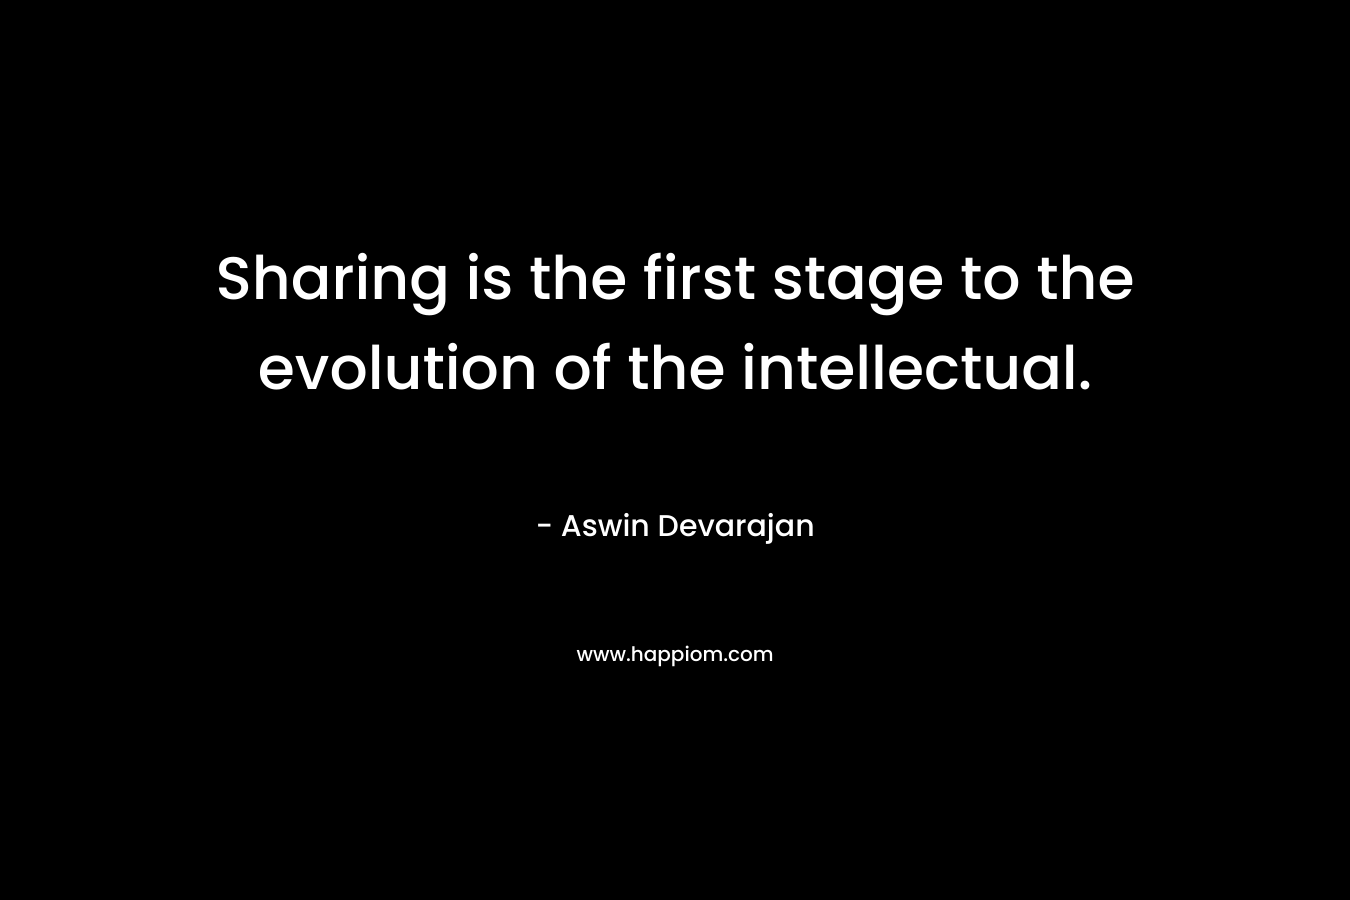 Sharing is the first stage to the evolution of the intellectual. – Aswin Devarajan